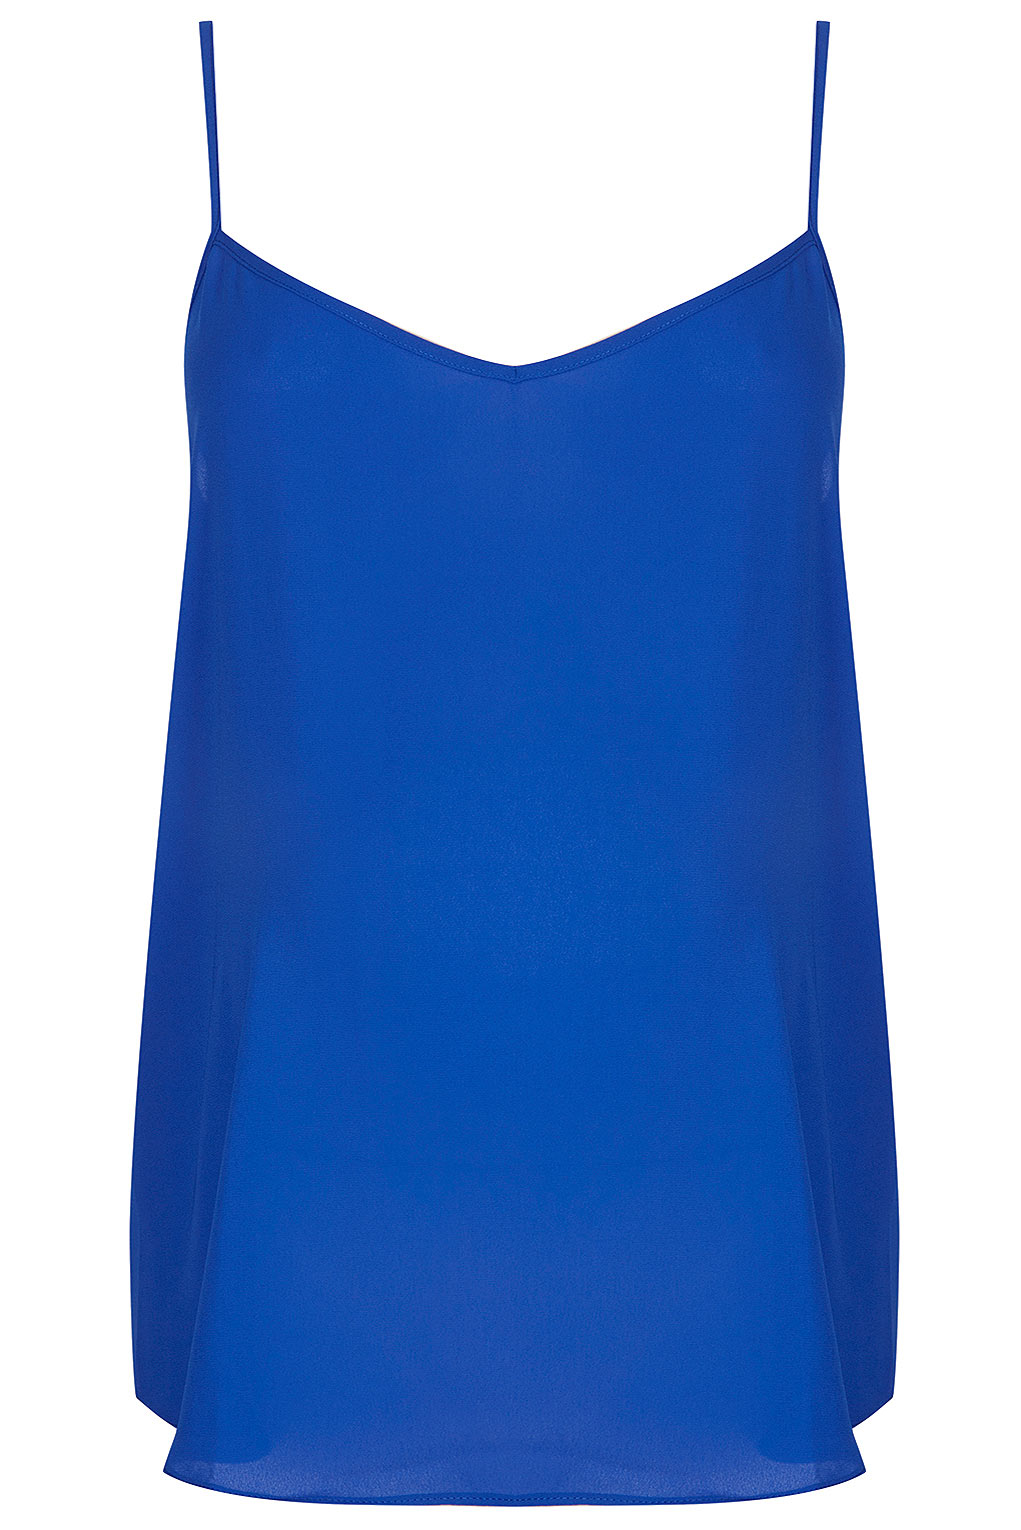 Lyst - Topshop Maternity Strappy Cami Top in Blue